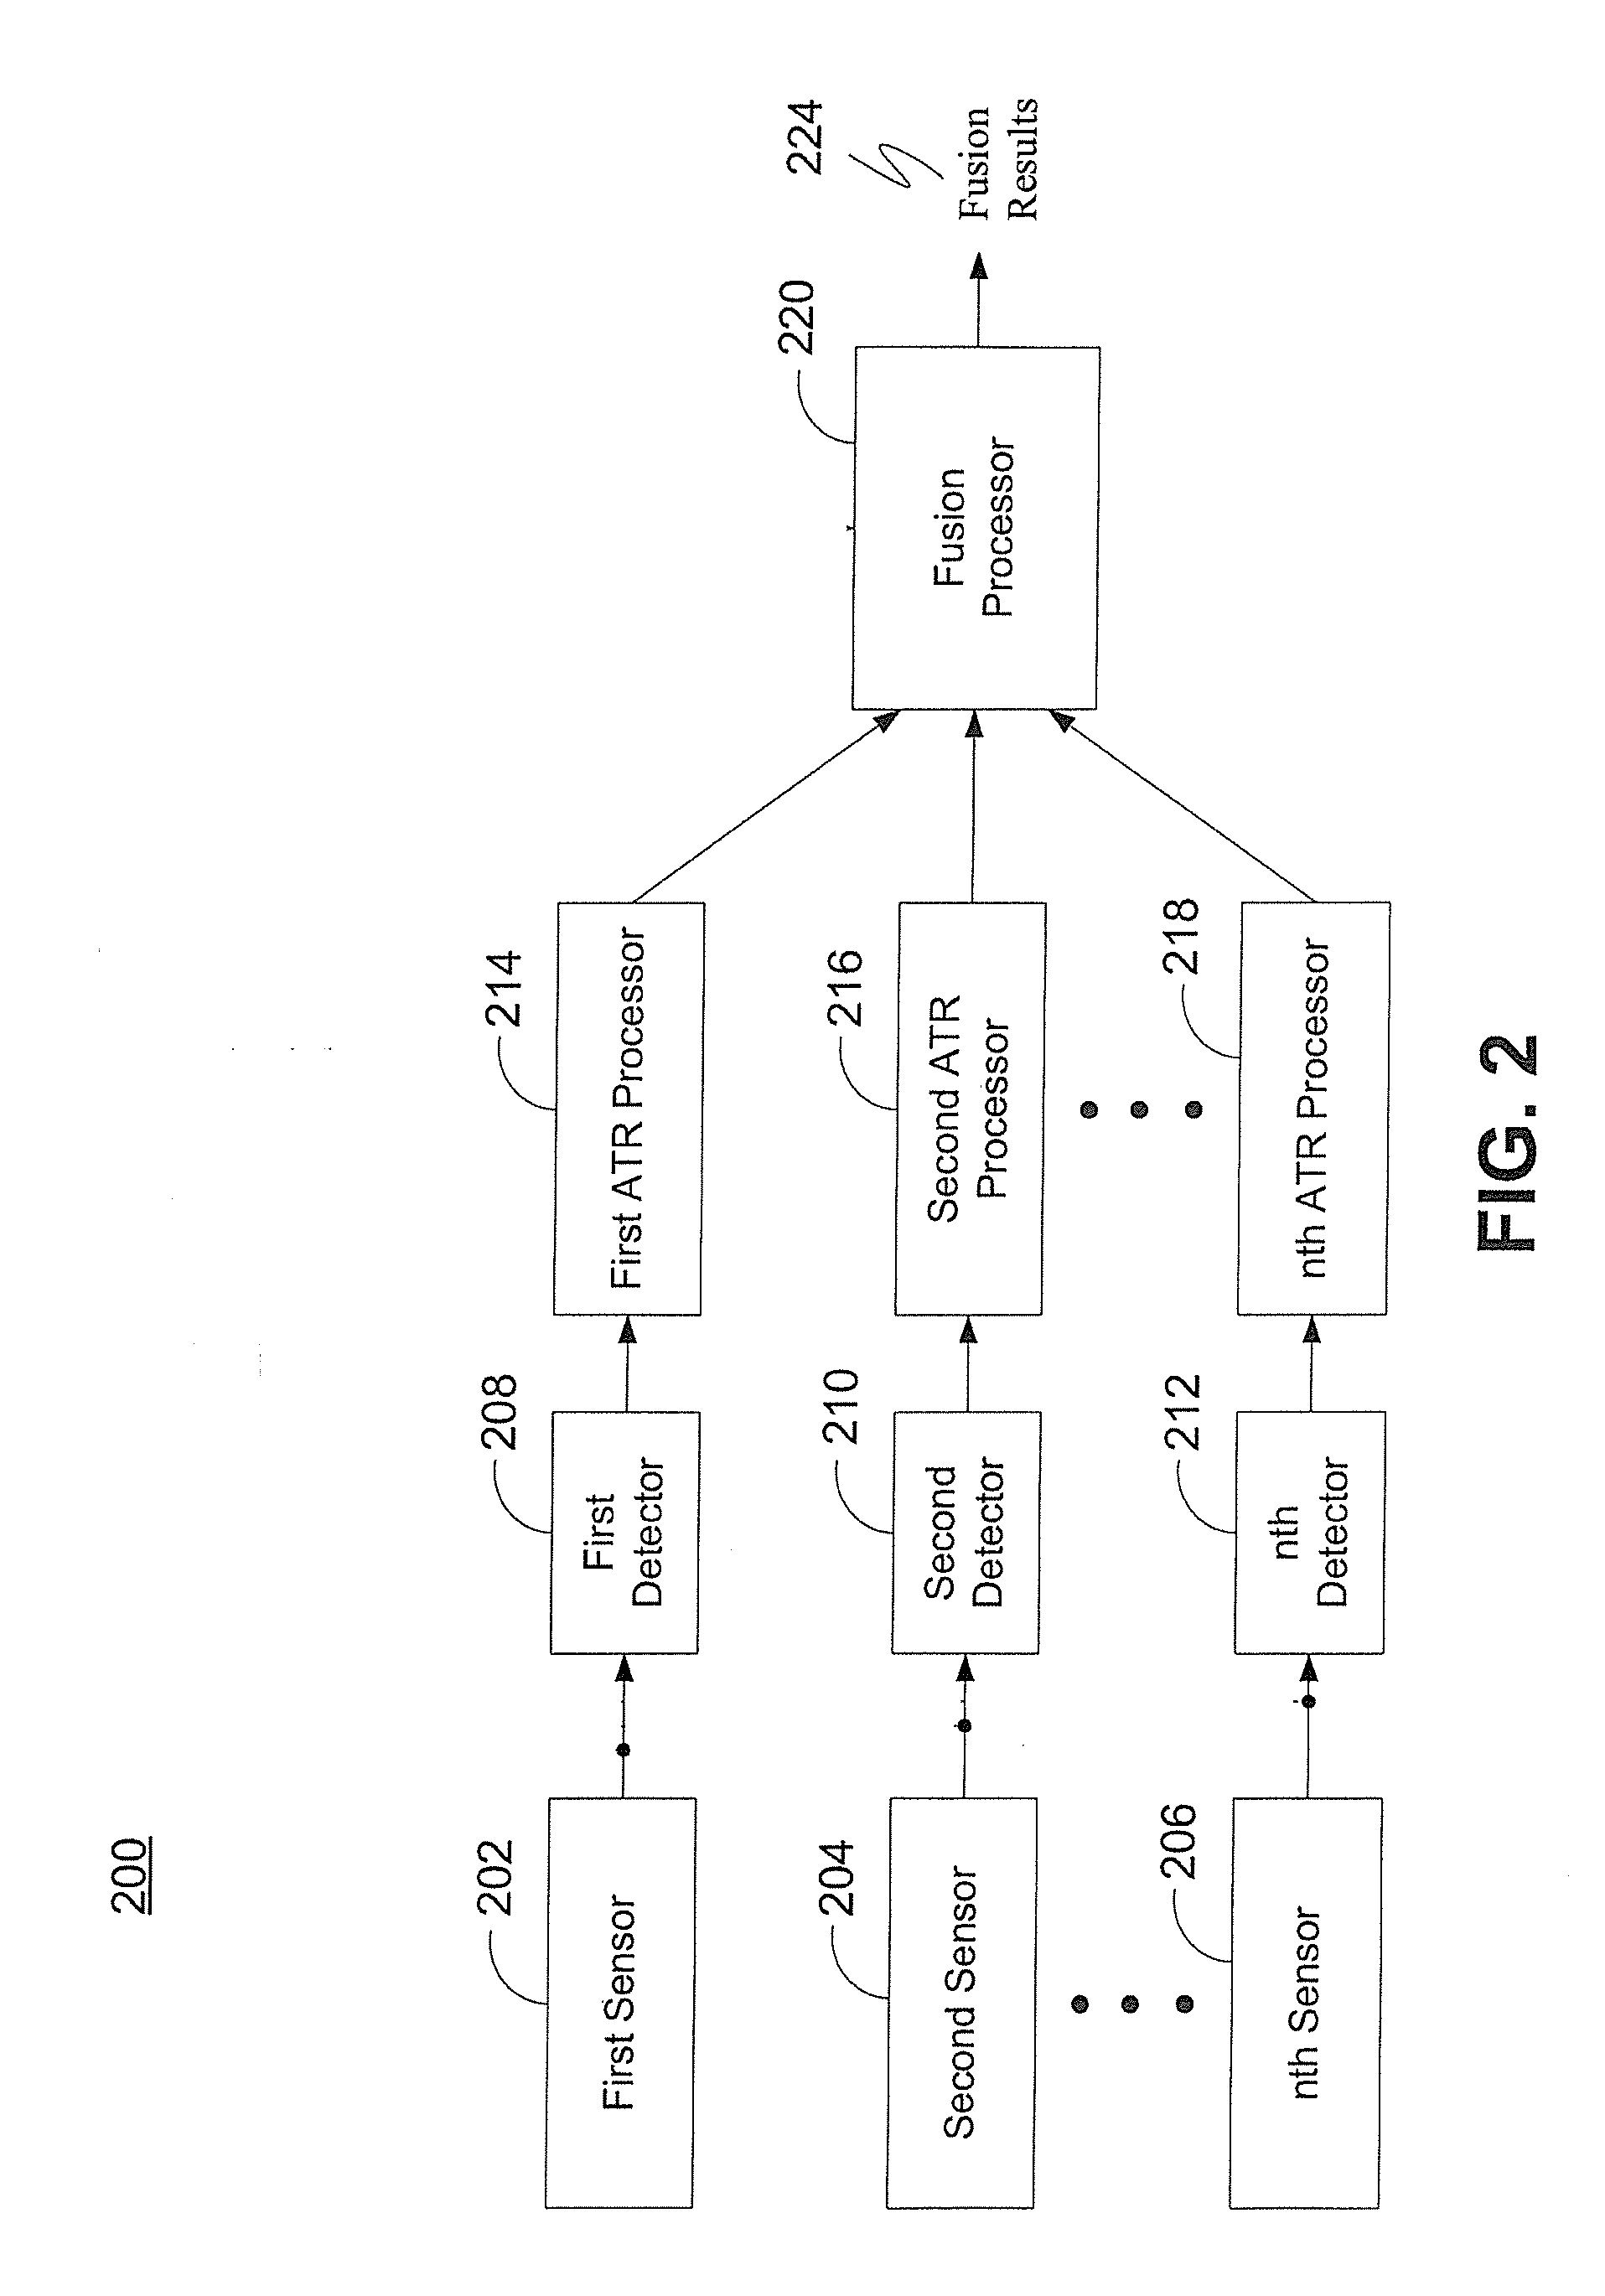 System and method for scaled multinomial-dirichlet bayesian evidence fusion